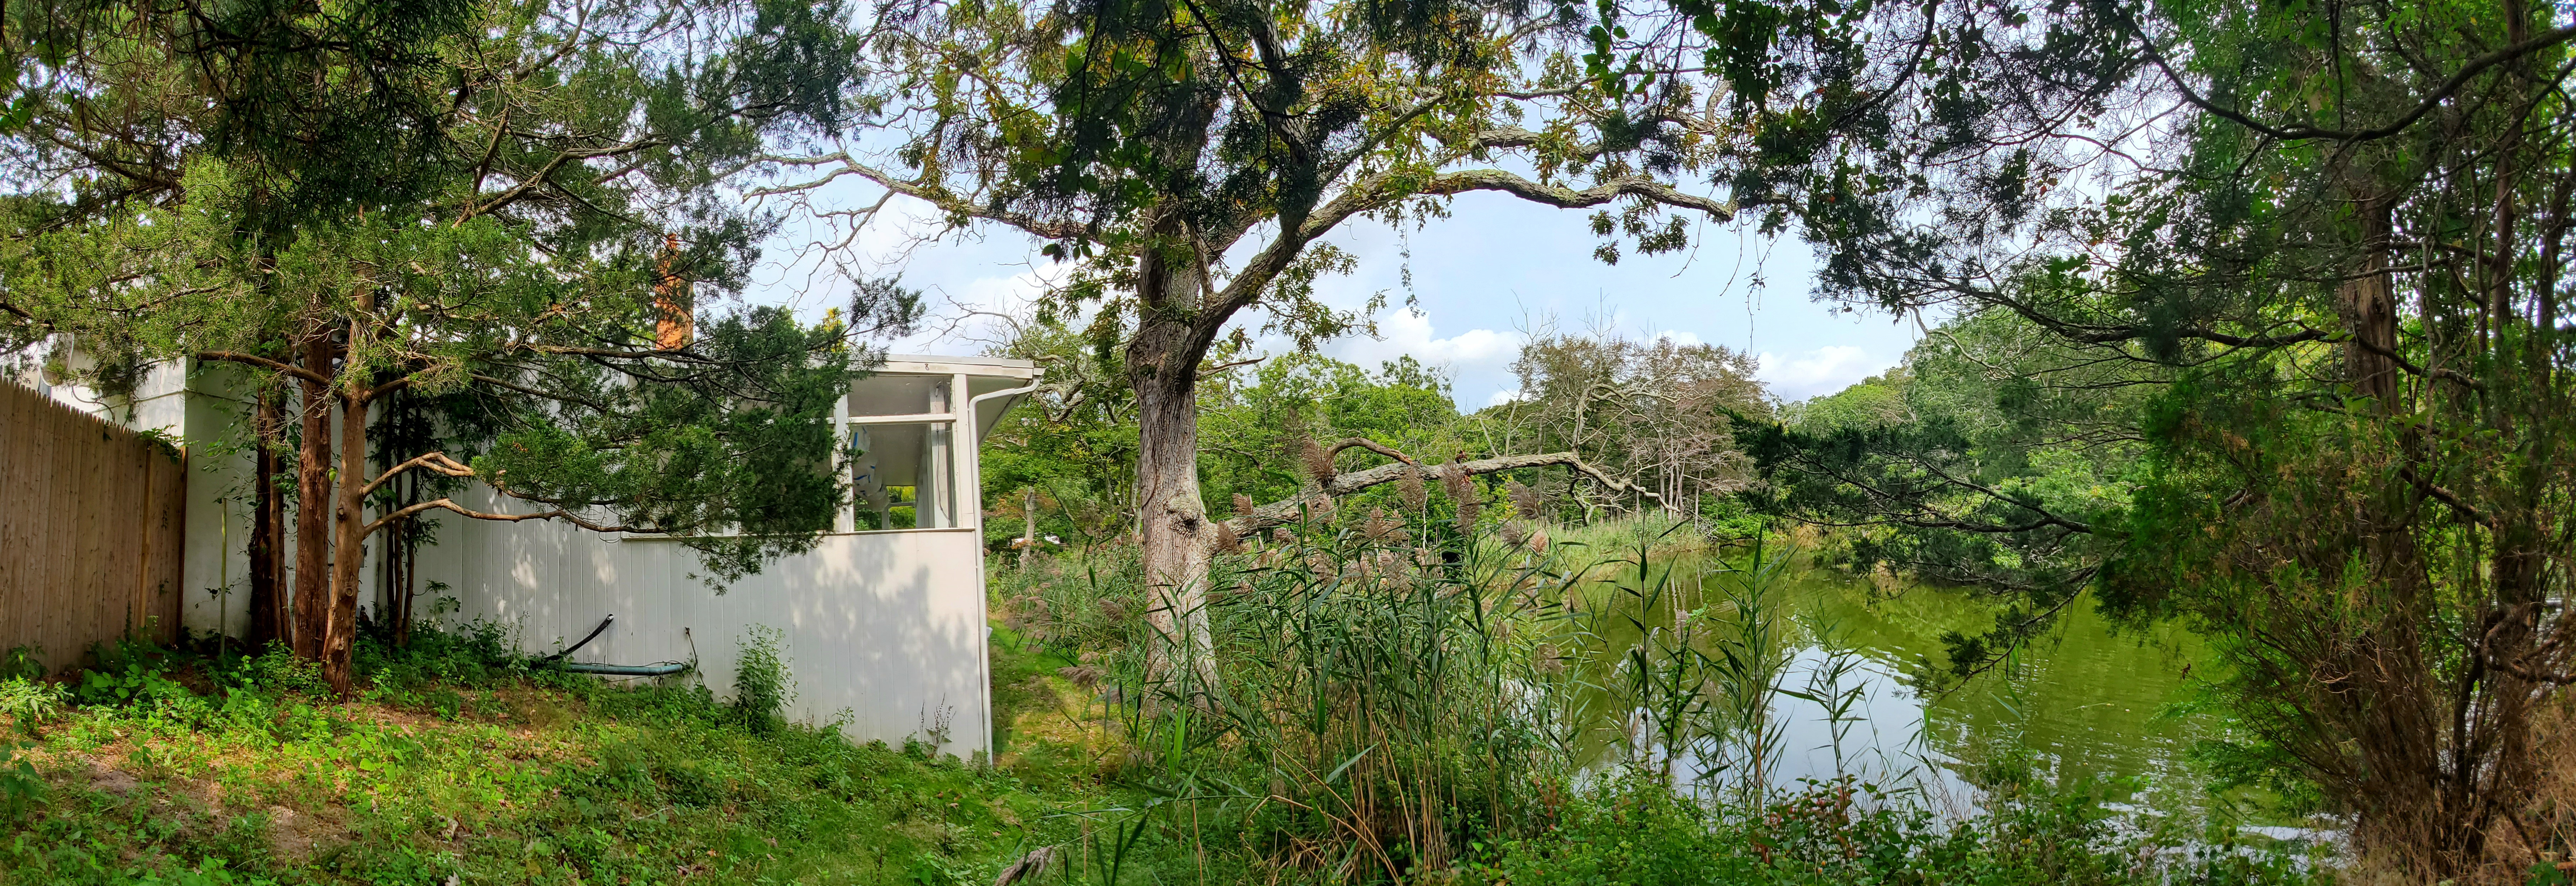 Georgica Pond panorama view with white building to be demolished